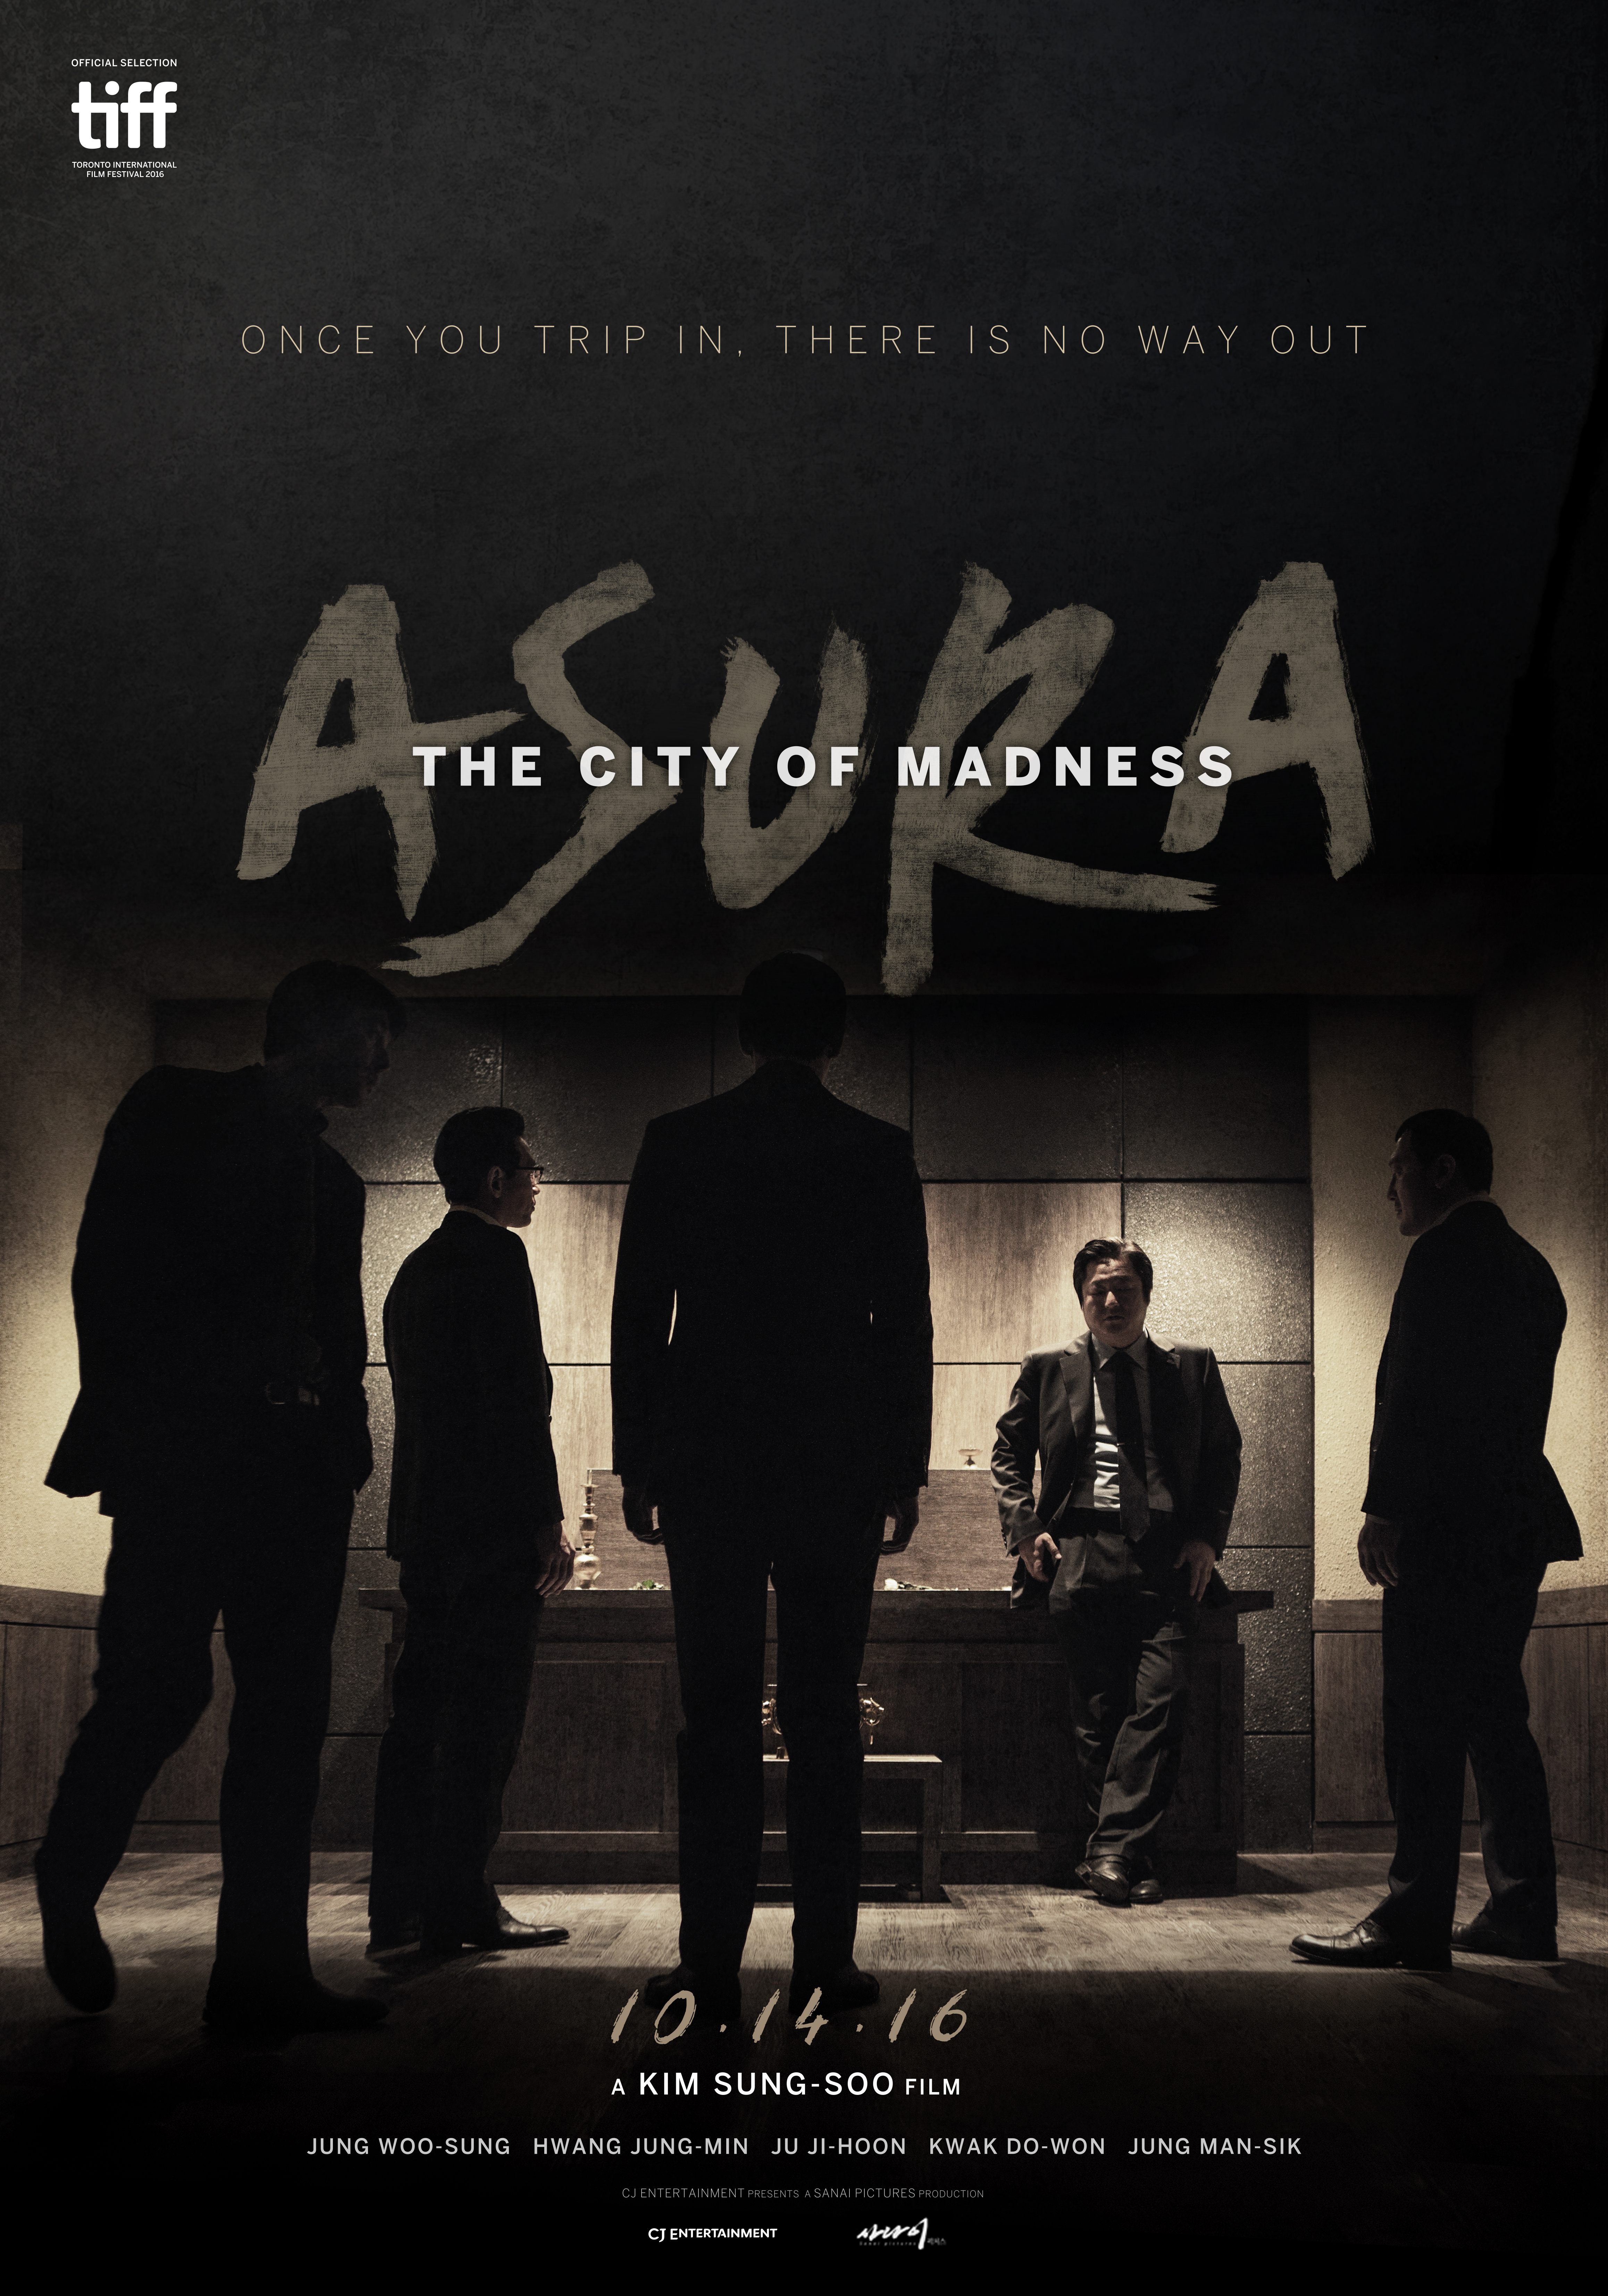 ASURA THE CITY OF MADNESS - Trailer Review